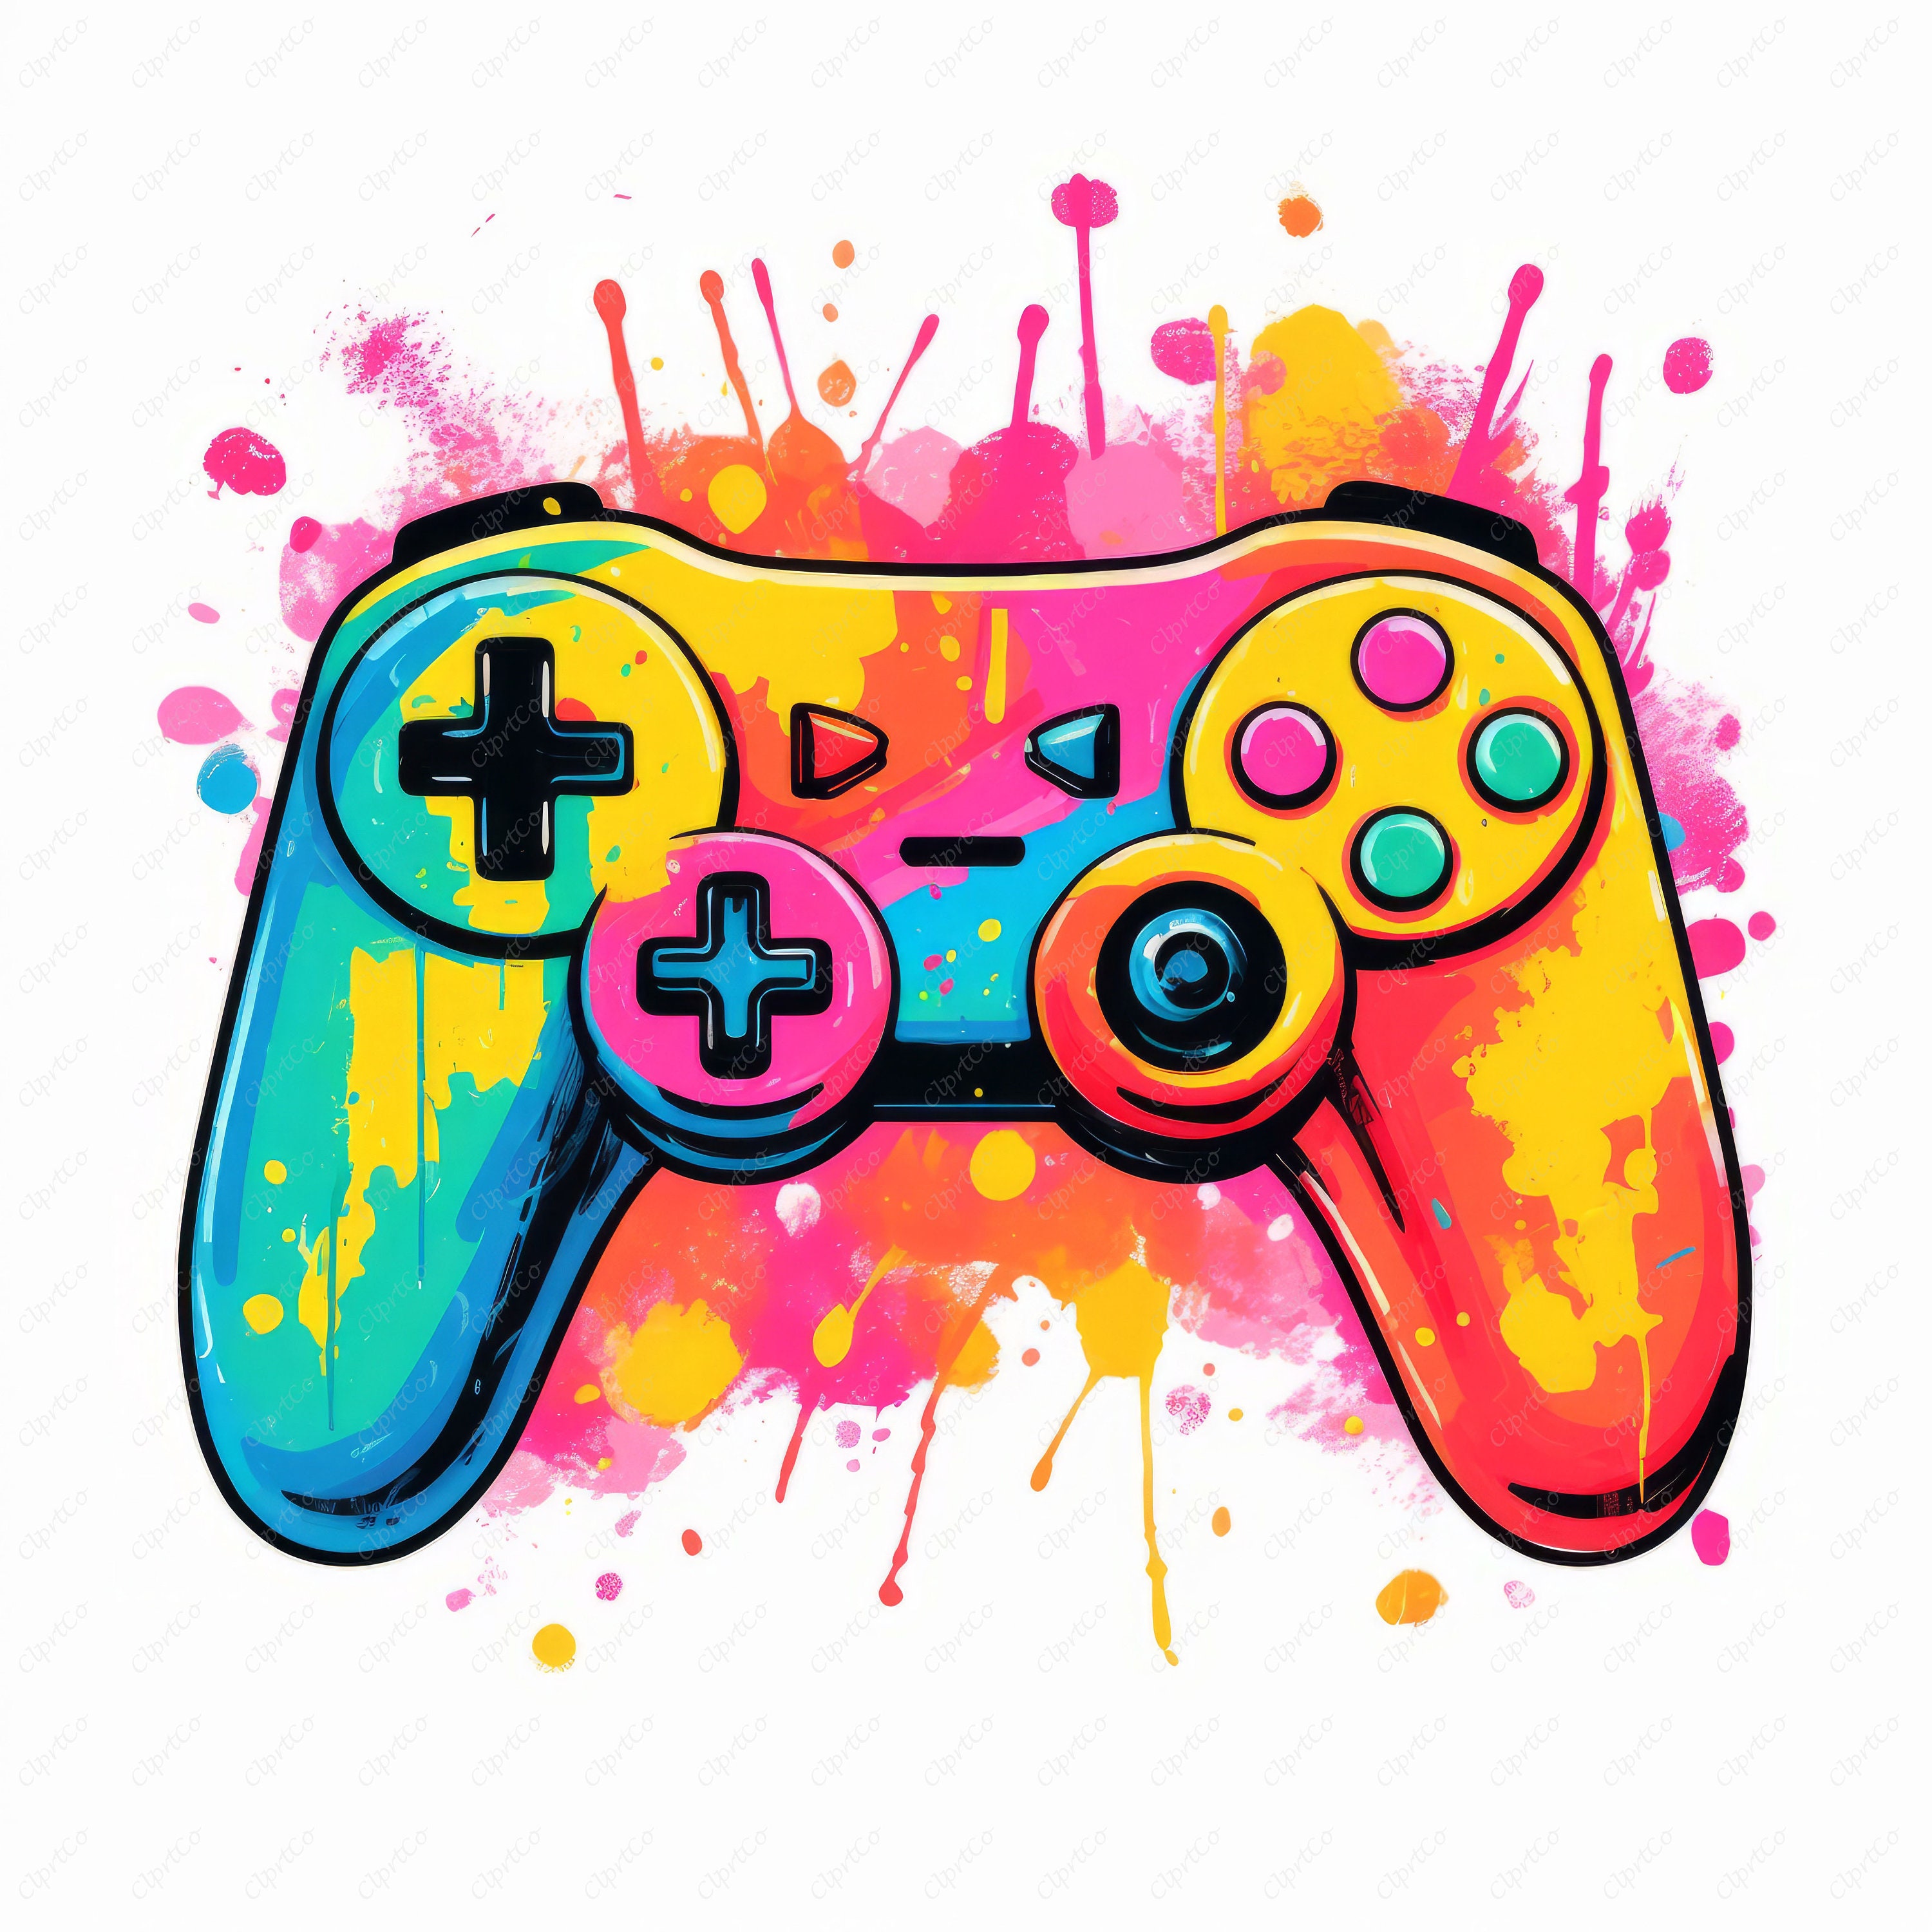 Gaming Controller Clipart 10 High-quality Images Wall Art Digital